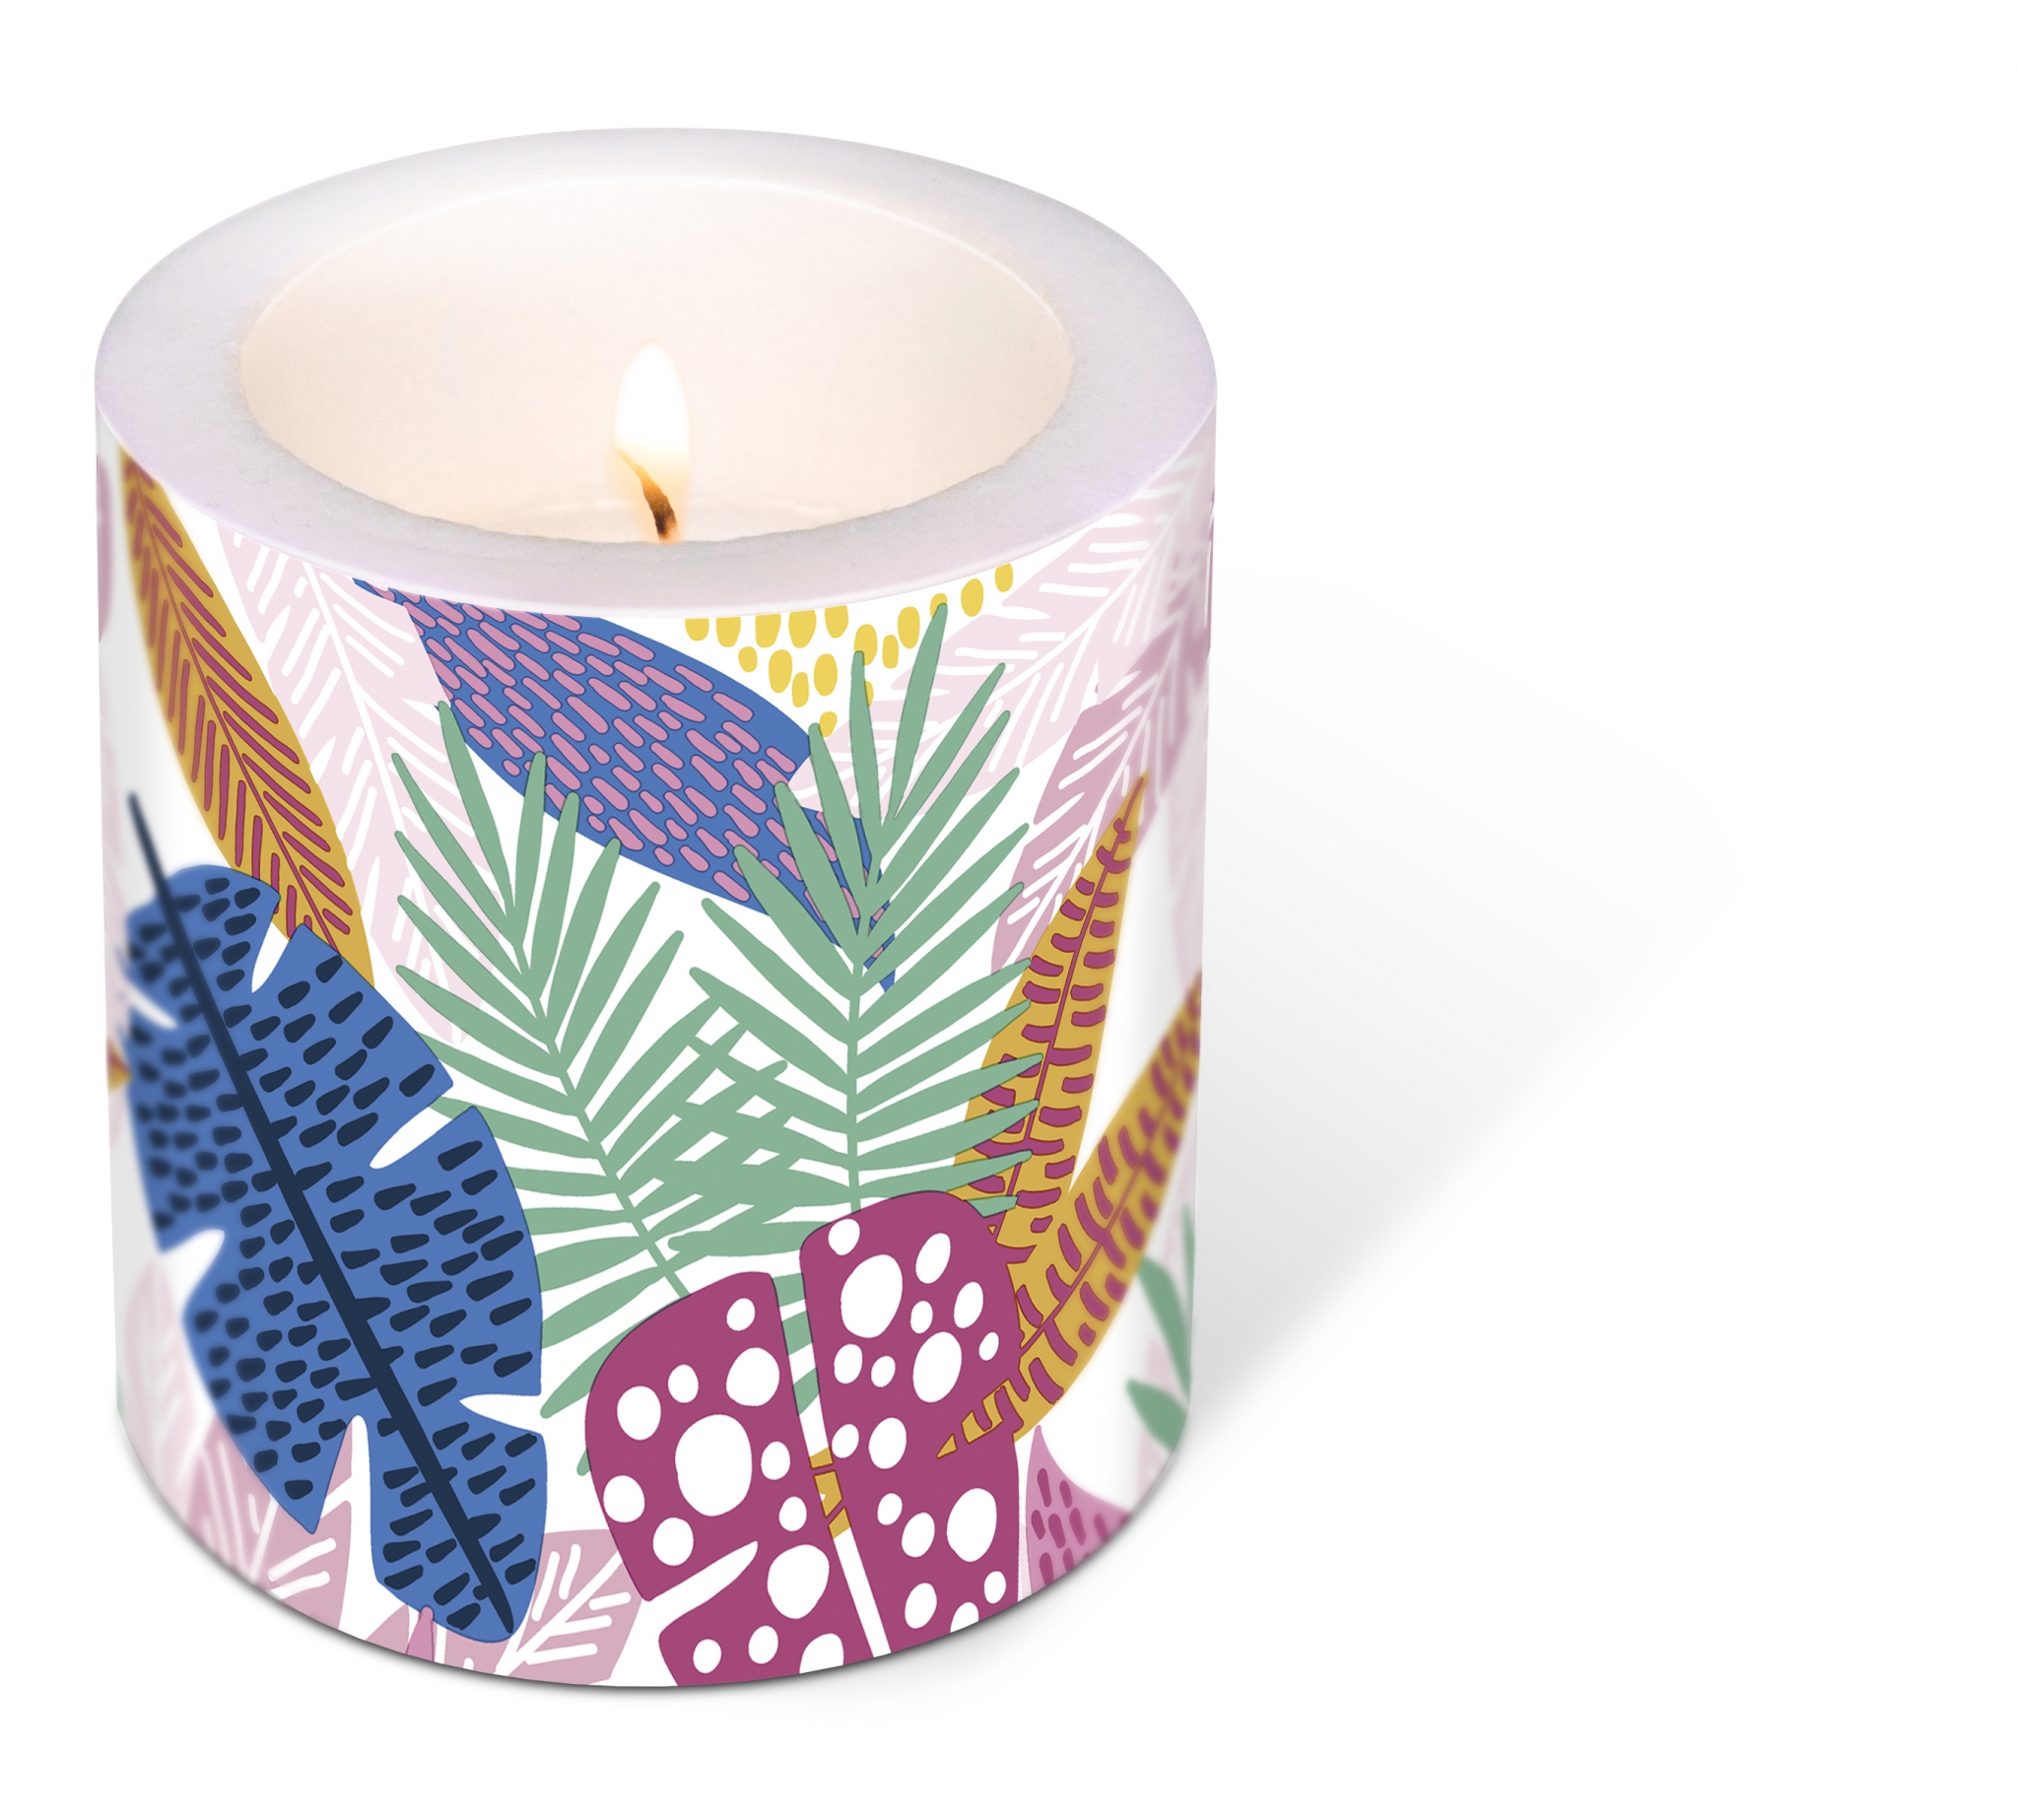 decorative candle - Decorated Candle Wild leaves